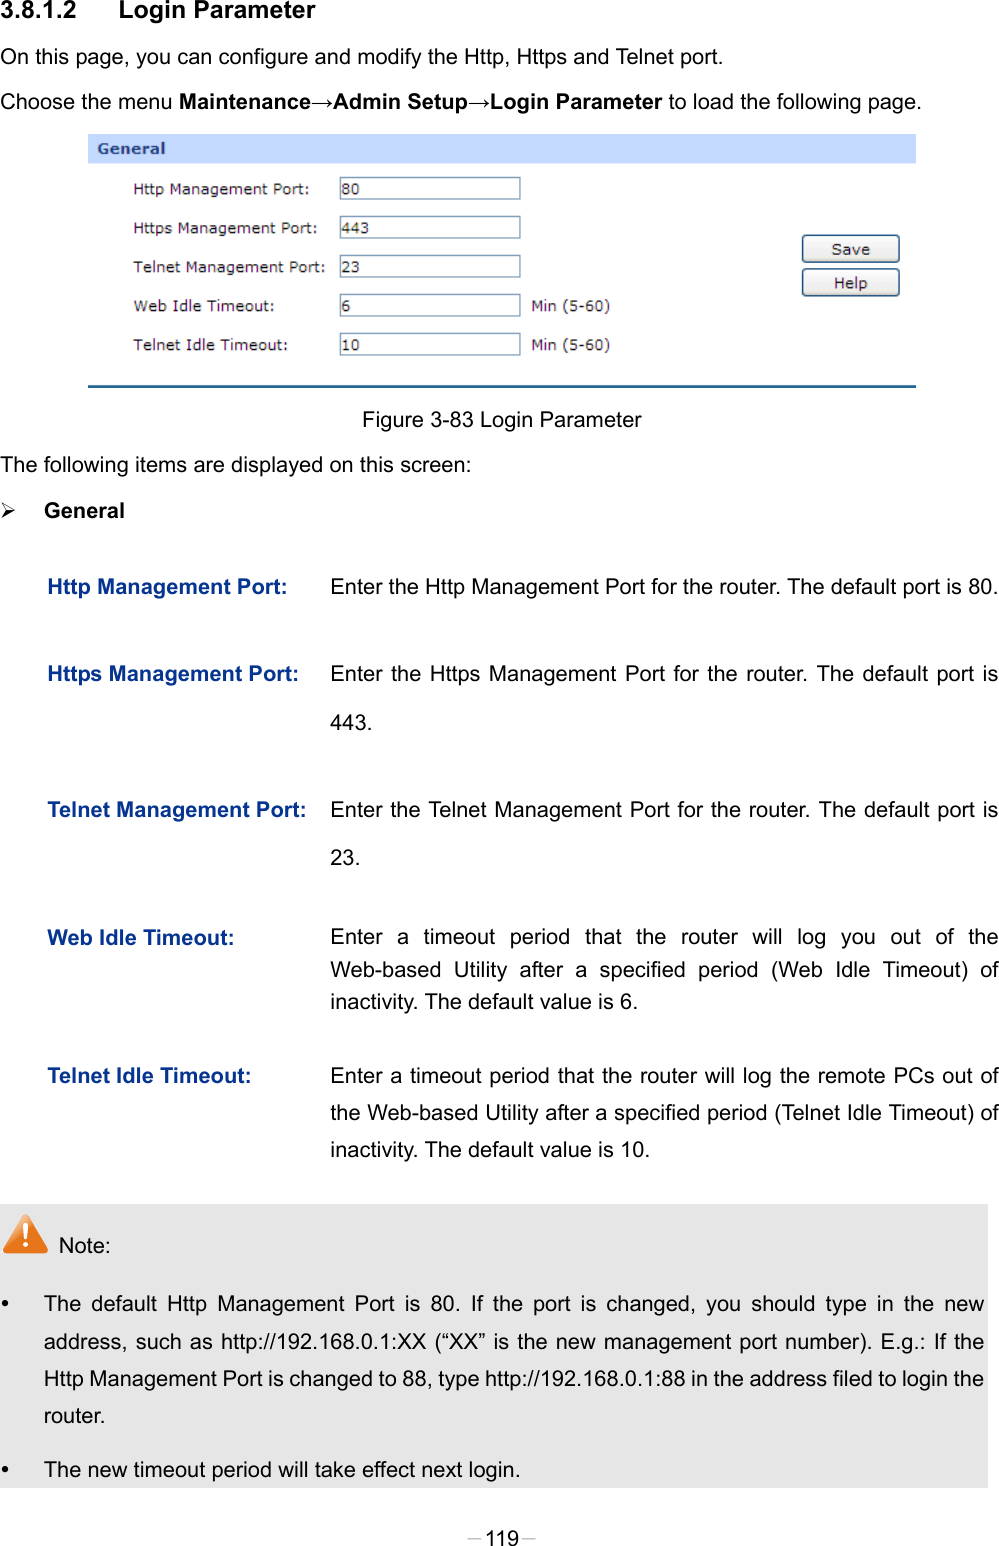  3.8.1.2 Login Parameter On this page, you can configure and modify the Http, Https and Telnet port. Choose the menu Maintenance→Admin Setup→Login Parameter to load the following page.  Figure 3-83 Login Parameter The following items are displayed on this screen:  General Http Management Port: Enter the Http Management Port for the router. The default port is 80. Https Management Port: Enter the Https Management Port for the router. The default port is 443. Telnet Management Port: Enter the Telnet Management Port for the router. The default port is 23. Web Idle Timeout: Enter a timeout period that the router will log you out of the Web-based Utility after a specified period (Web Idle Timeout) of inactivity. The default value is 6. Telnet Idle Timeout: Enter a timeout period that the router will log the remote PCs out of the Web-based Utility after a specified period (Telnet Idle Timeout) of inactivity. The default value is 10.  Note:  The default Http Management Port is 80. If the port is changed, you should type in the new address, such as http://192.168.0.1:XX (“XX” is the new management port number). E.g.: If the Http Management Port is changed to 88, type http://192.168.0.1:88 in the address filed to login the router.  The new timeout period will take effect next login. -119- 